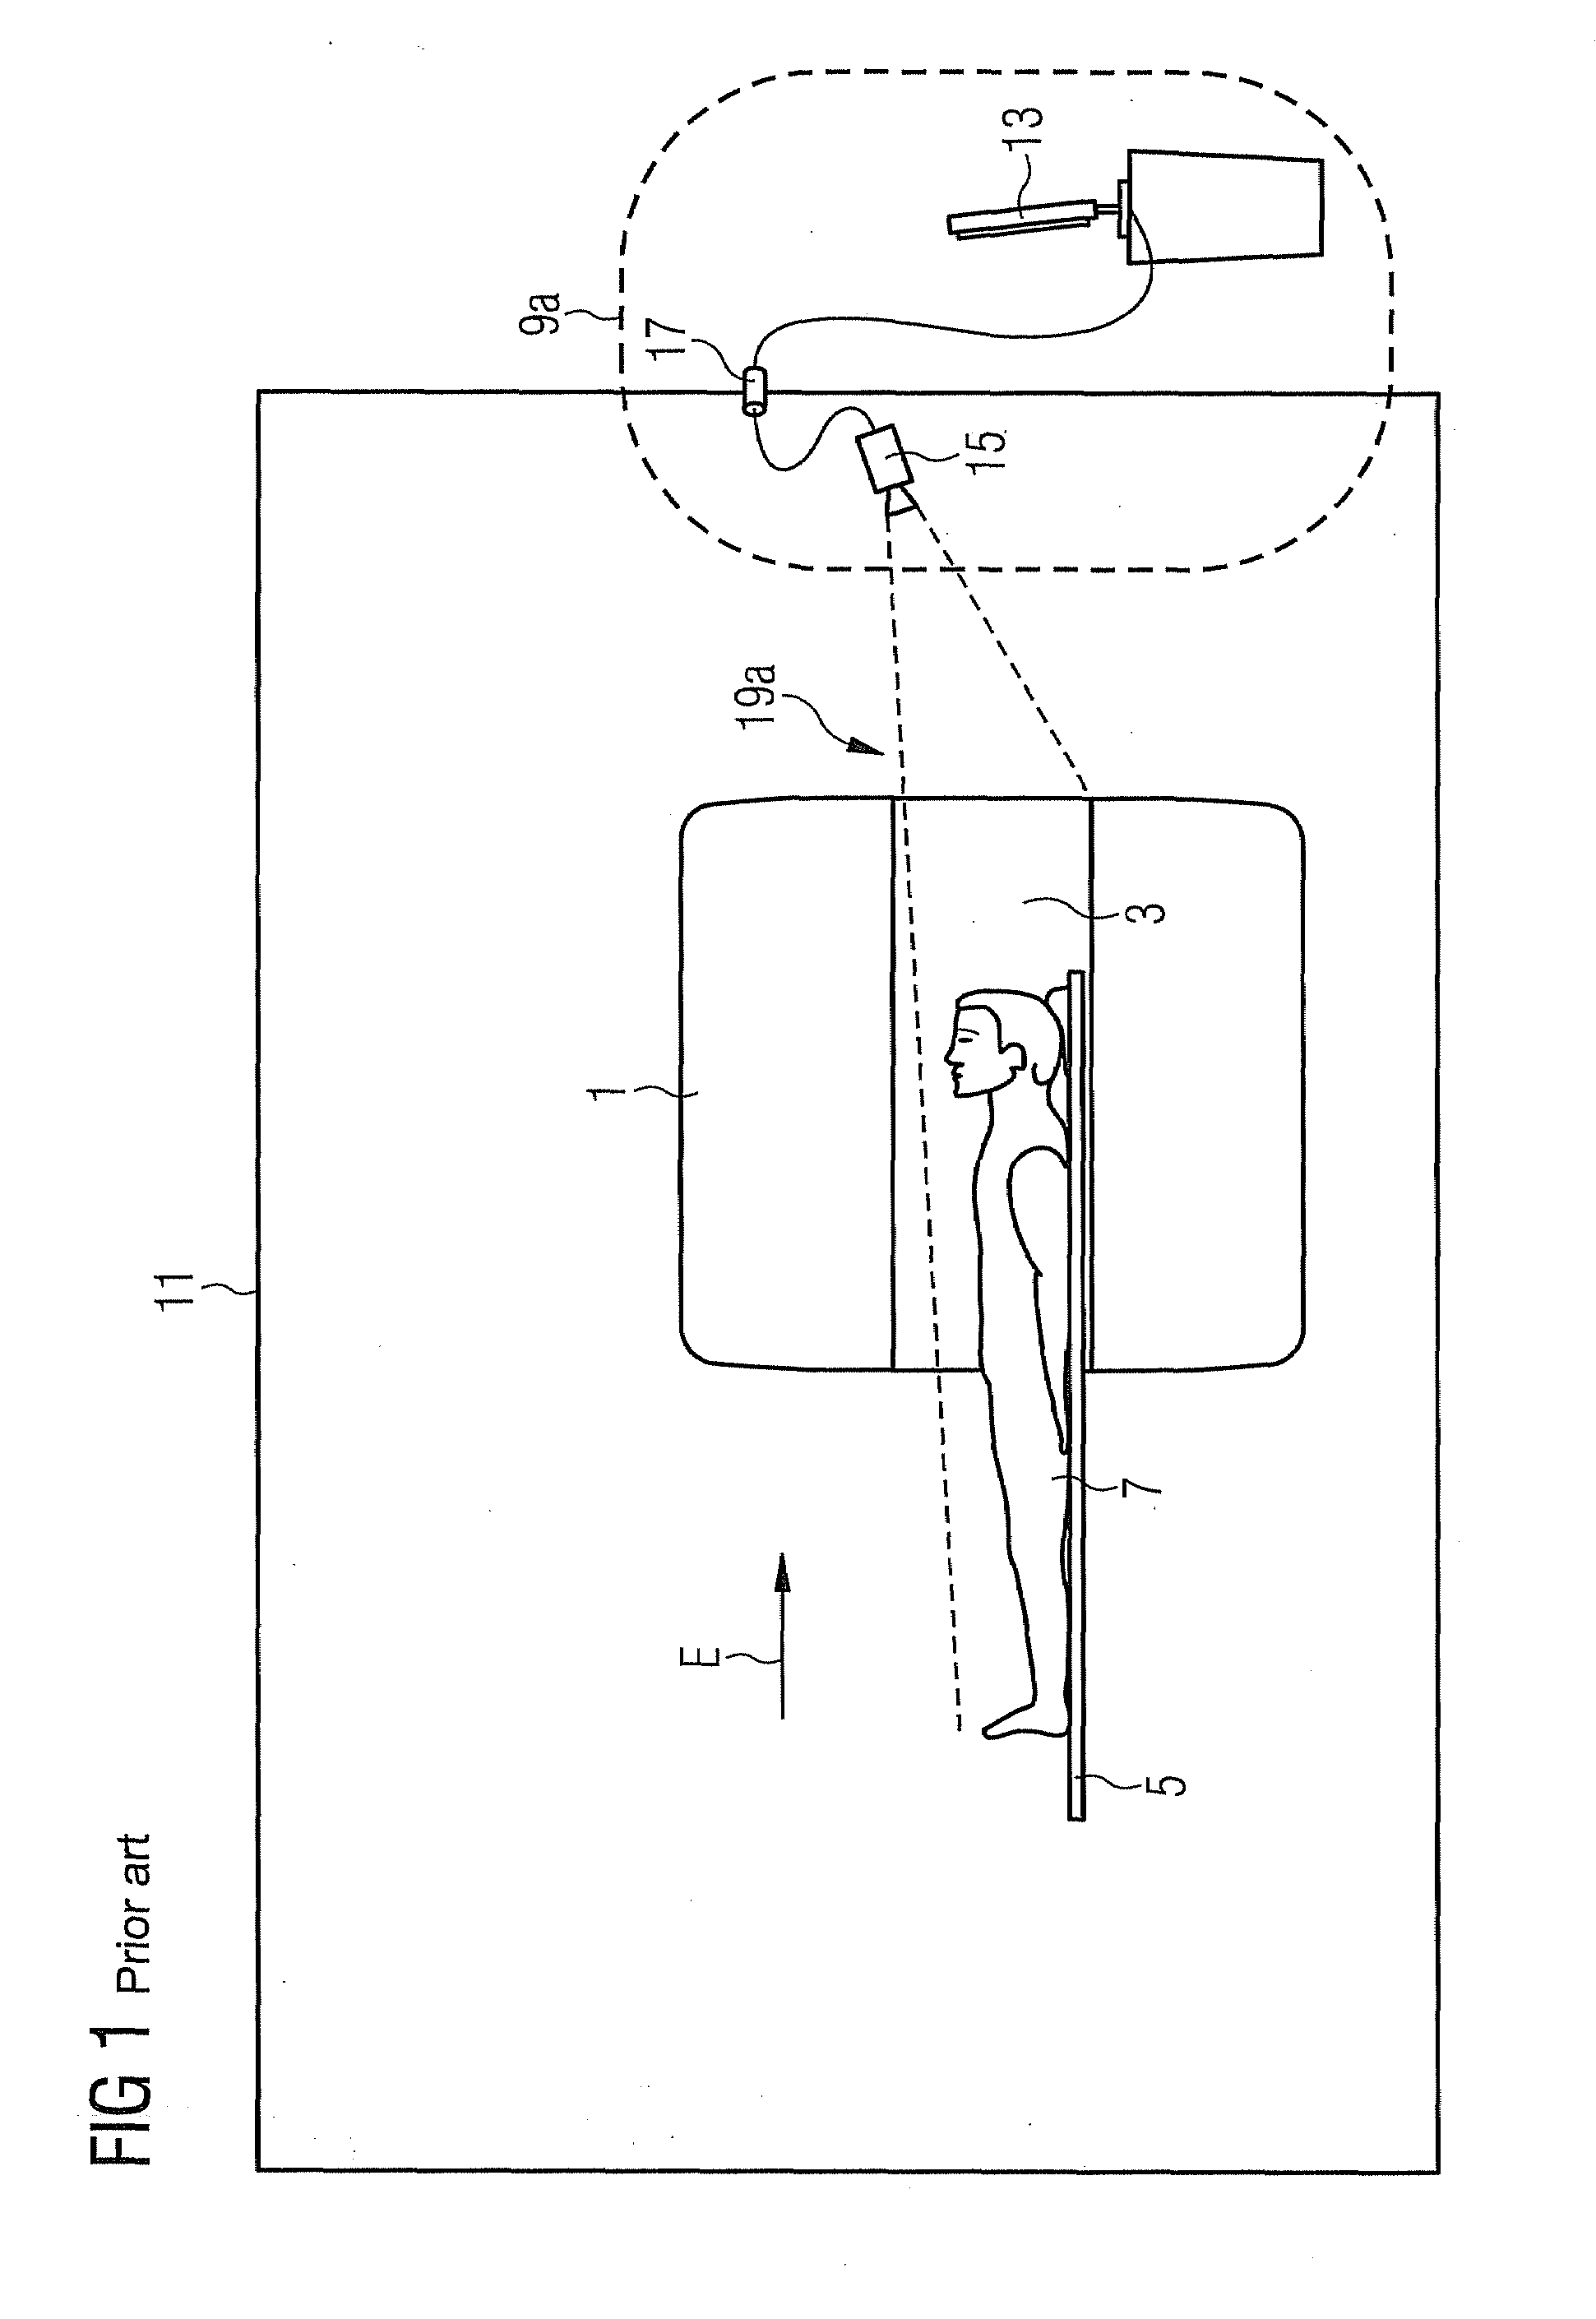 Tomography arrangement and method for monitoring persons